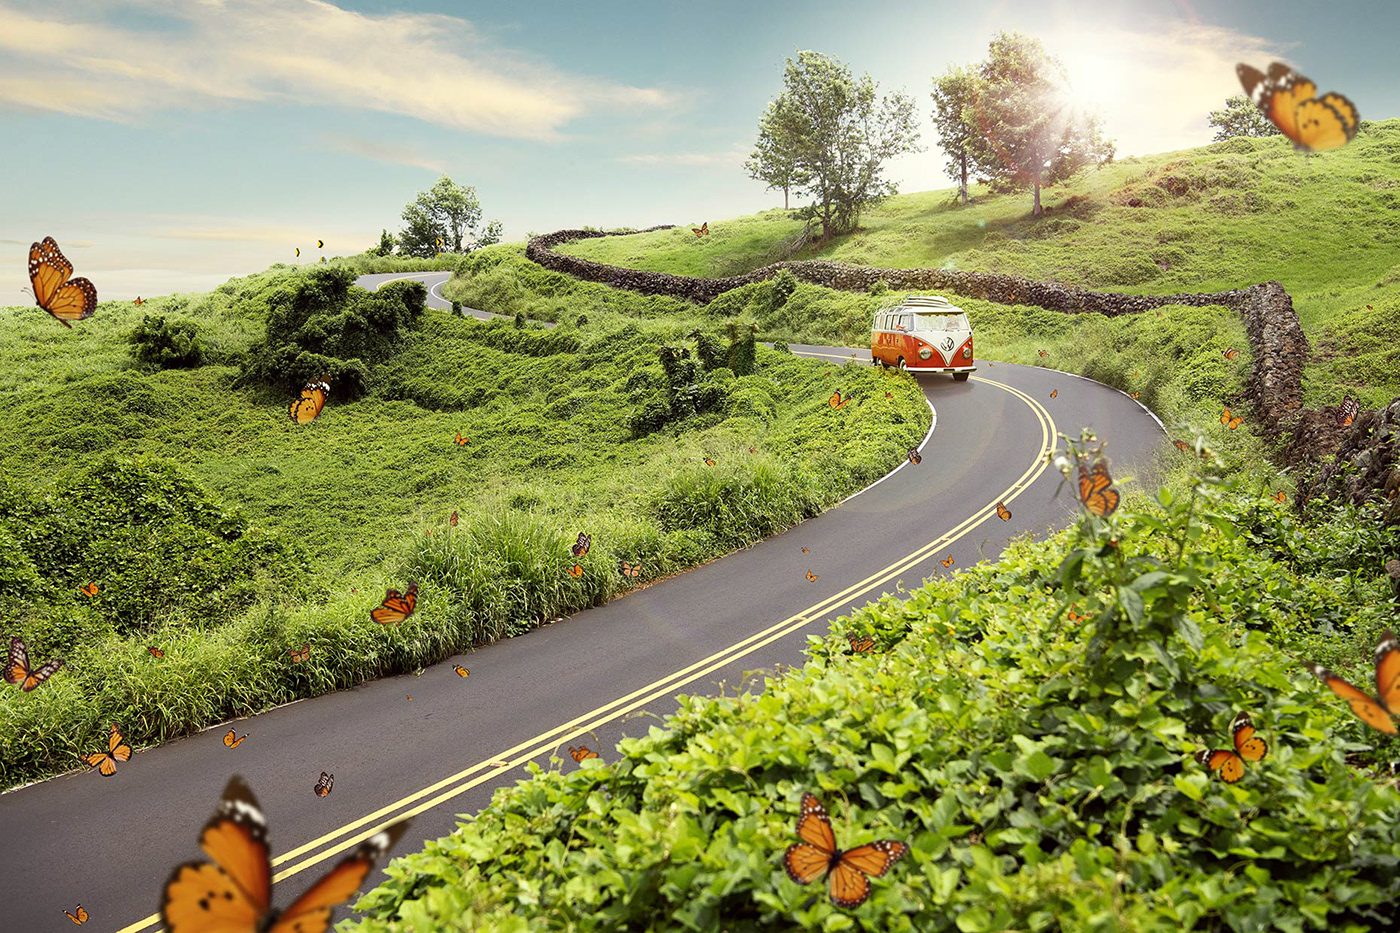 Road trip composite for Adobe. VW Bus driving down a winding road through a swarm of butterflies.